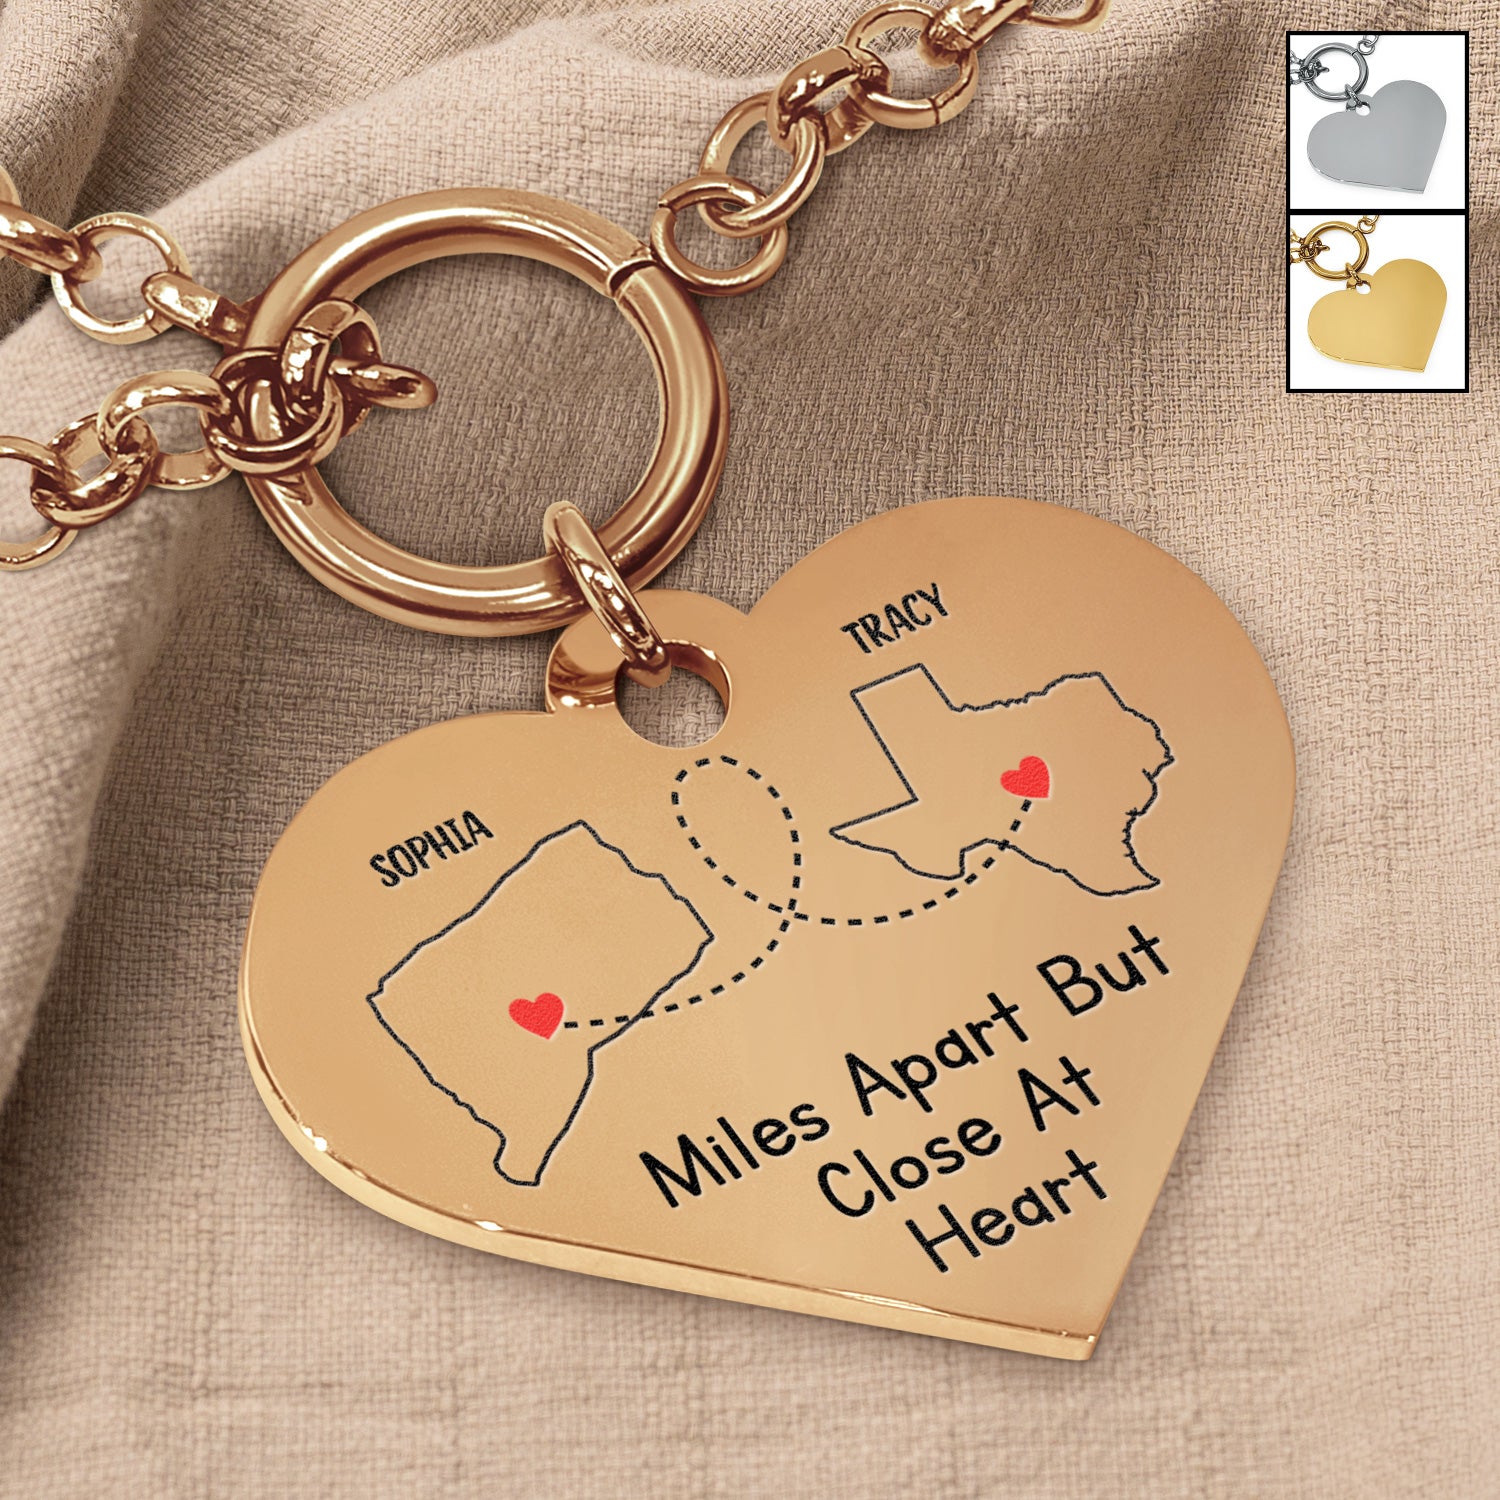 Miles Apart But Close At Heart - Birthday, Going Away Gifts For Besties, Sisters - Personalized Heart Bracelet